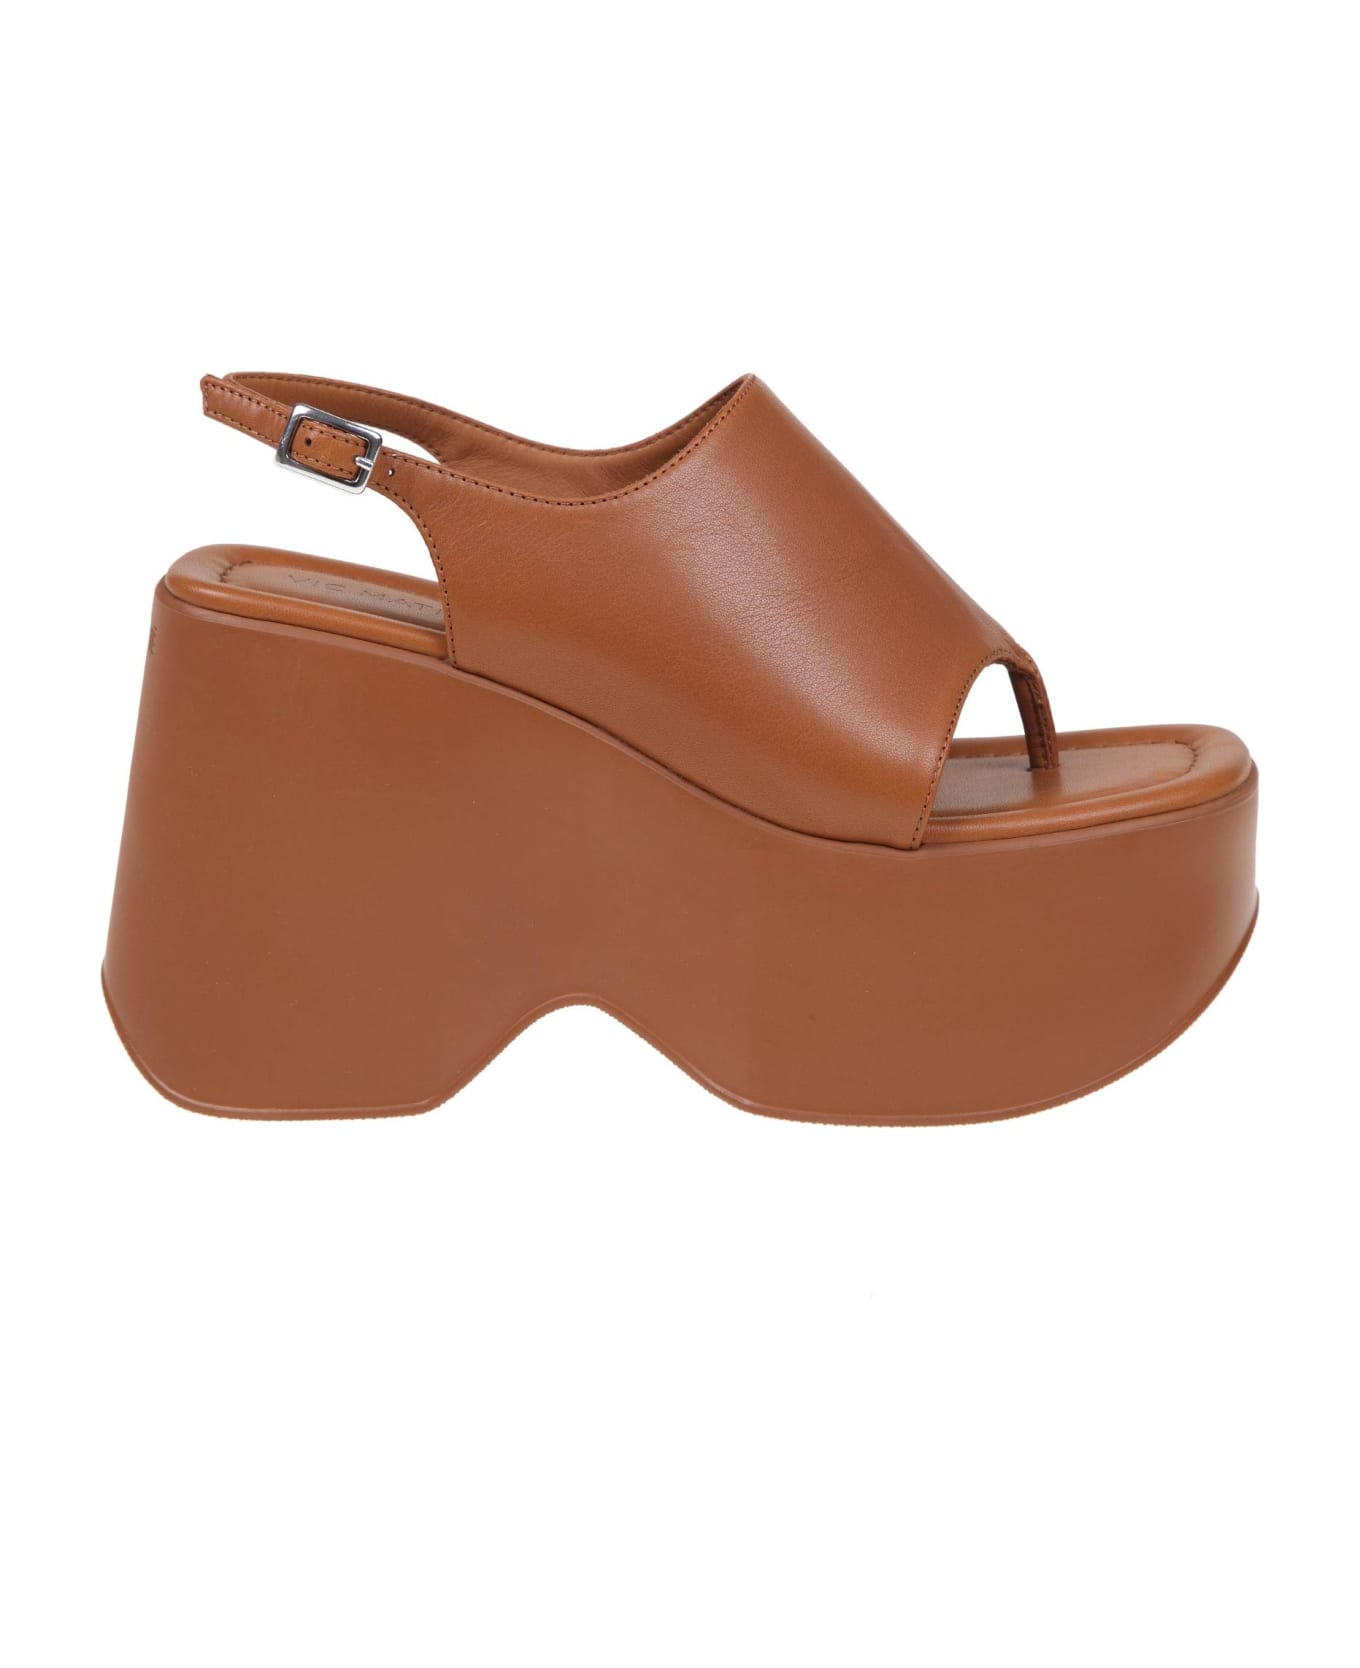 Vic Matié ' Travel Sandal In Leather Color Leather - BROWN